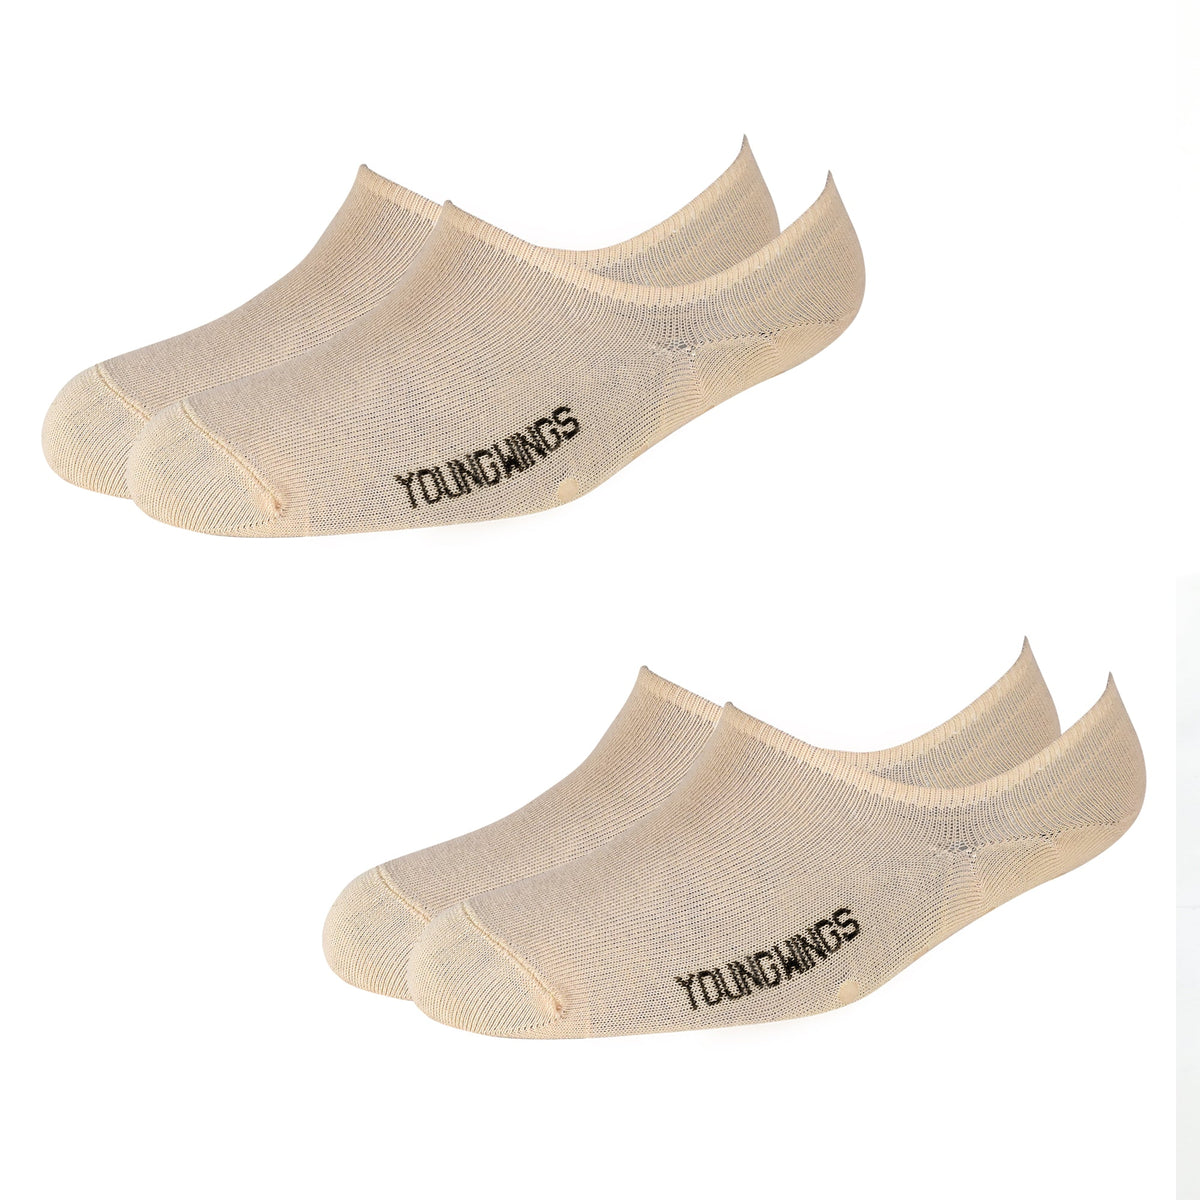 Young Wings Anti-Slip Unisex Home/Yoga Cotton No-Show Socks - (Pack of 2 Pairs) - Style code: M2-135